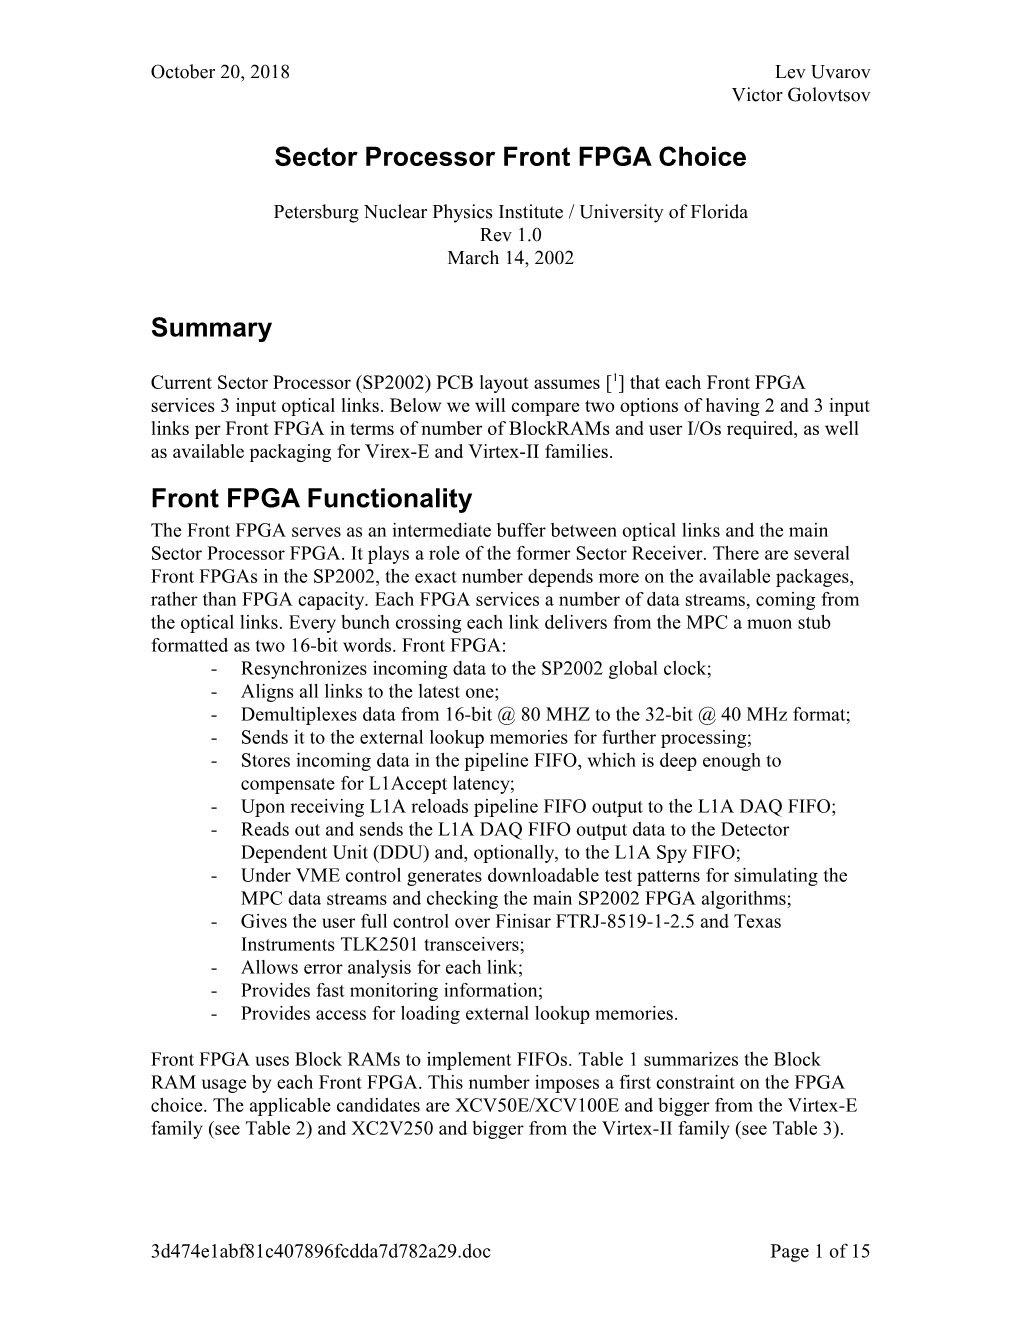 Sector Processor Front FPGA Choice